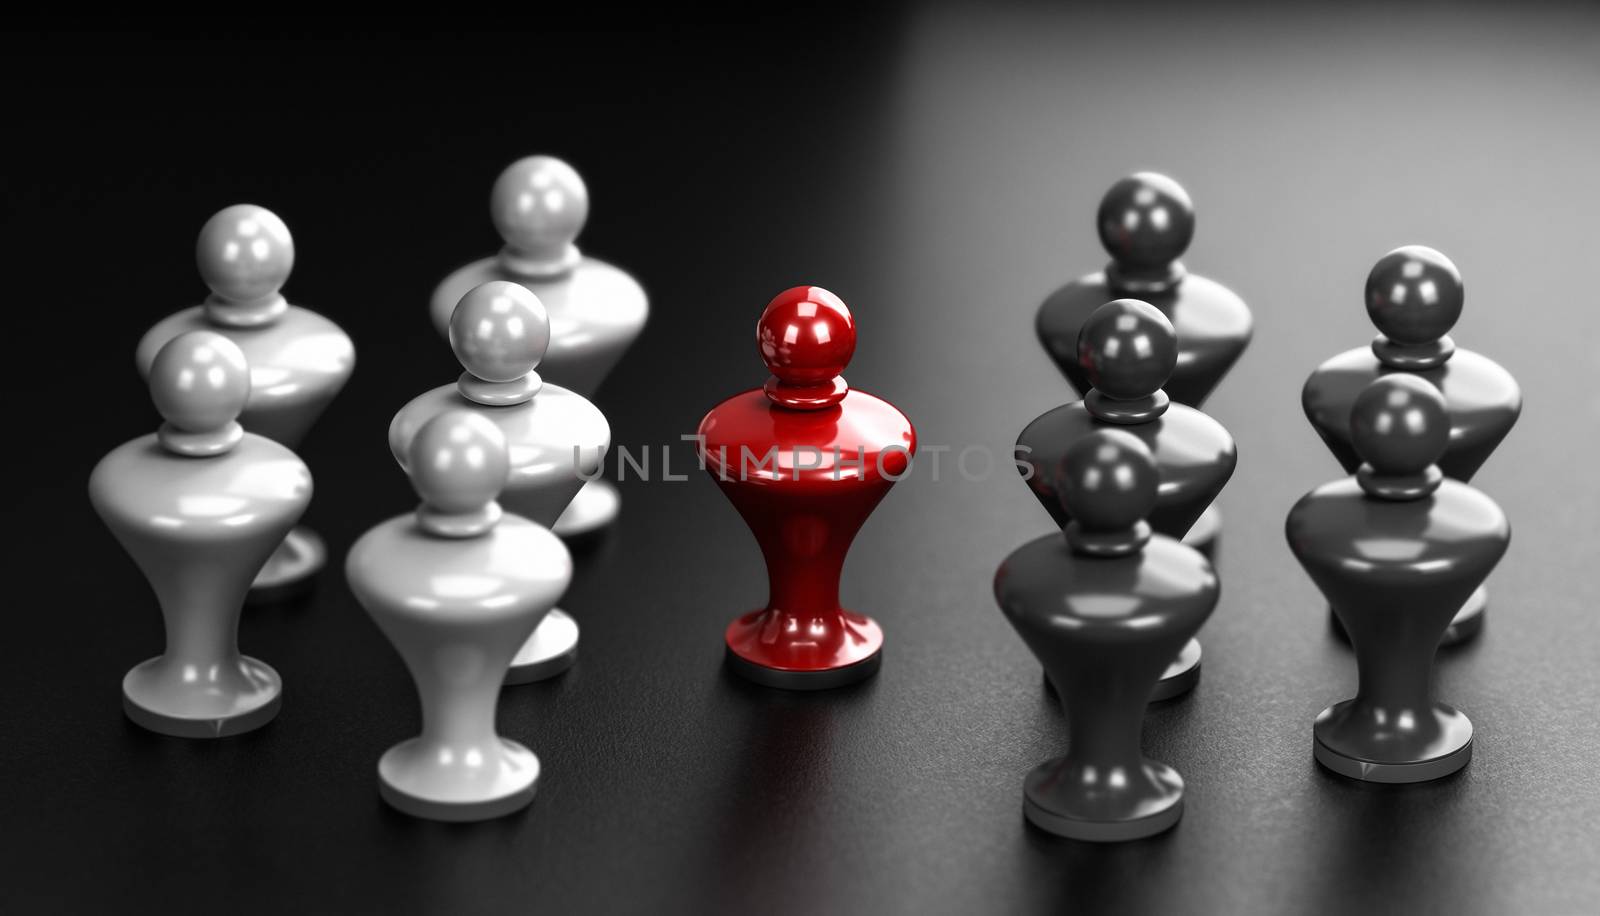 3D illustration of two groups of white and grey pawns and a mediator in the middle. Abstract concept of arbitration between two parties.